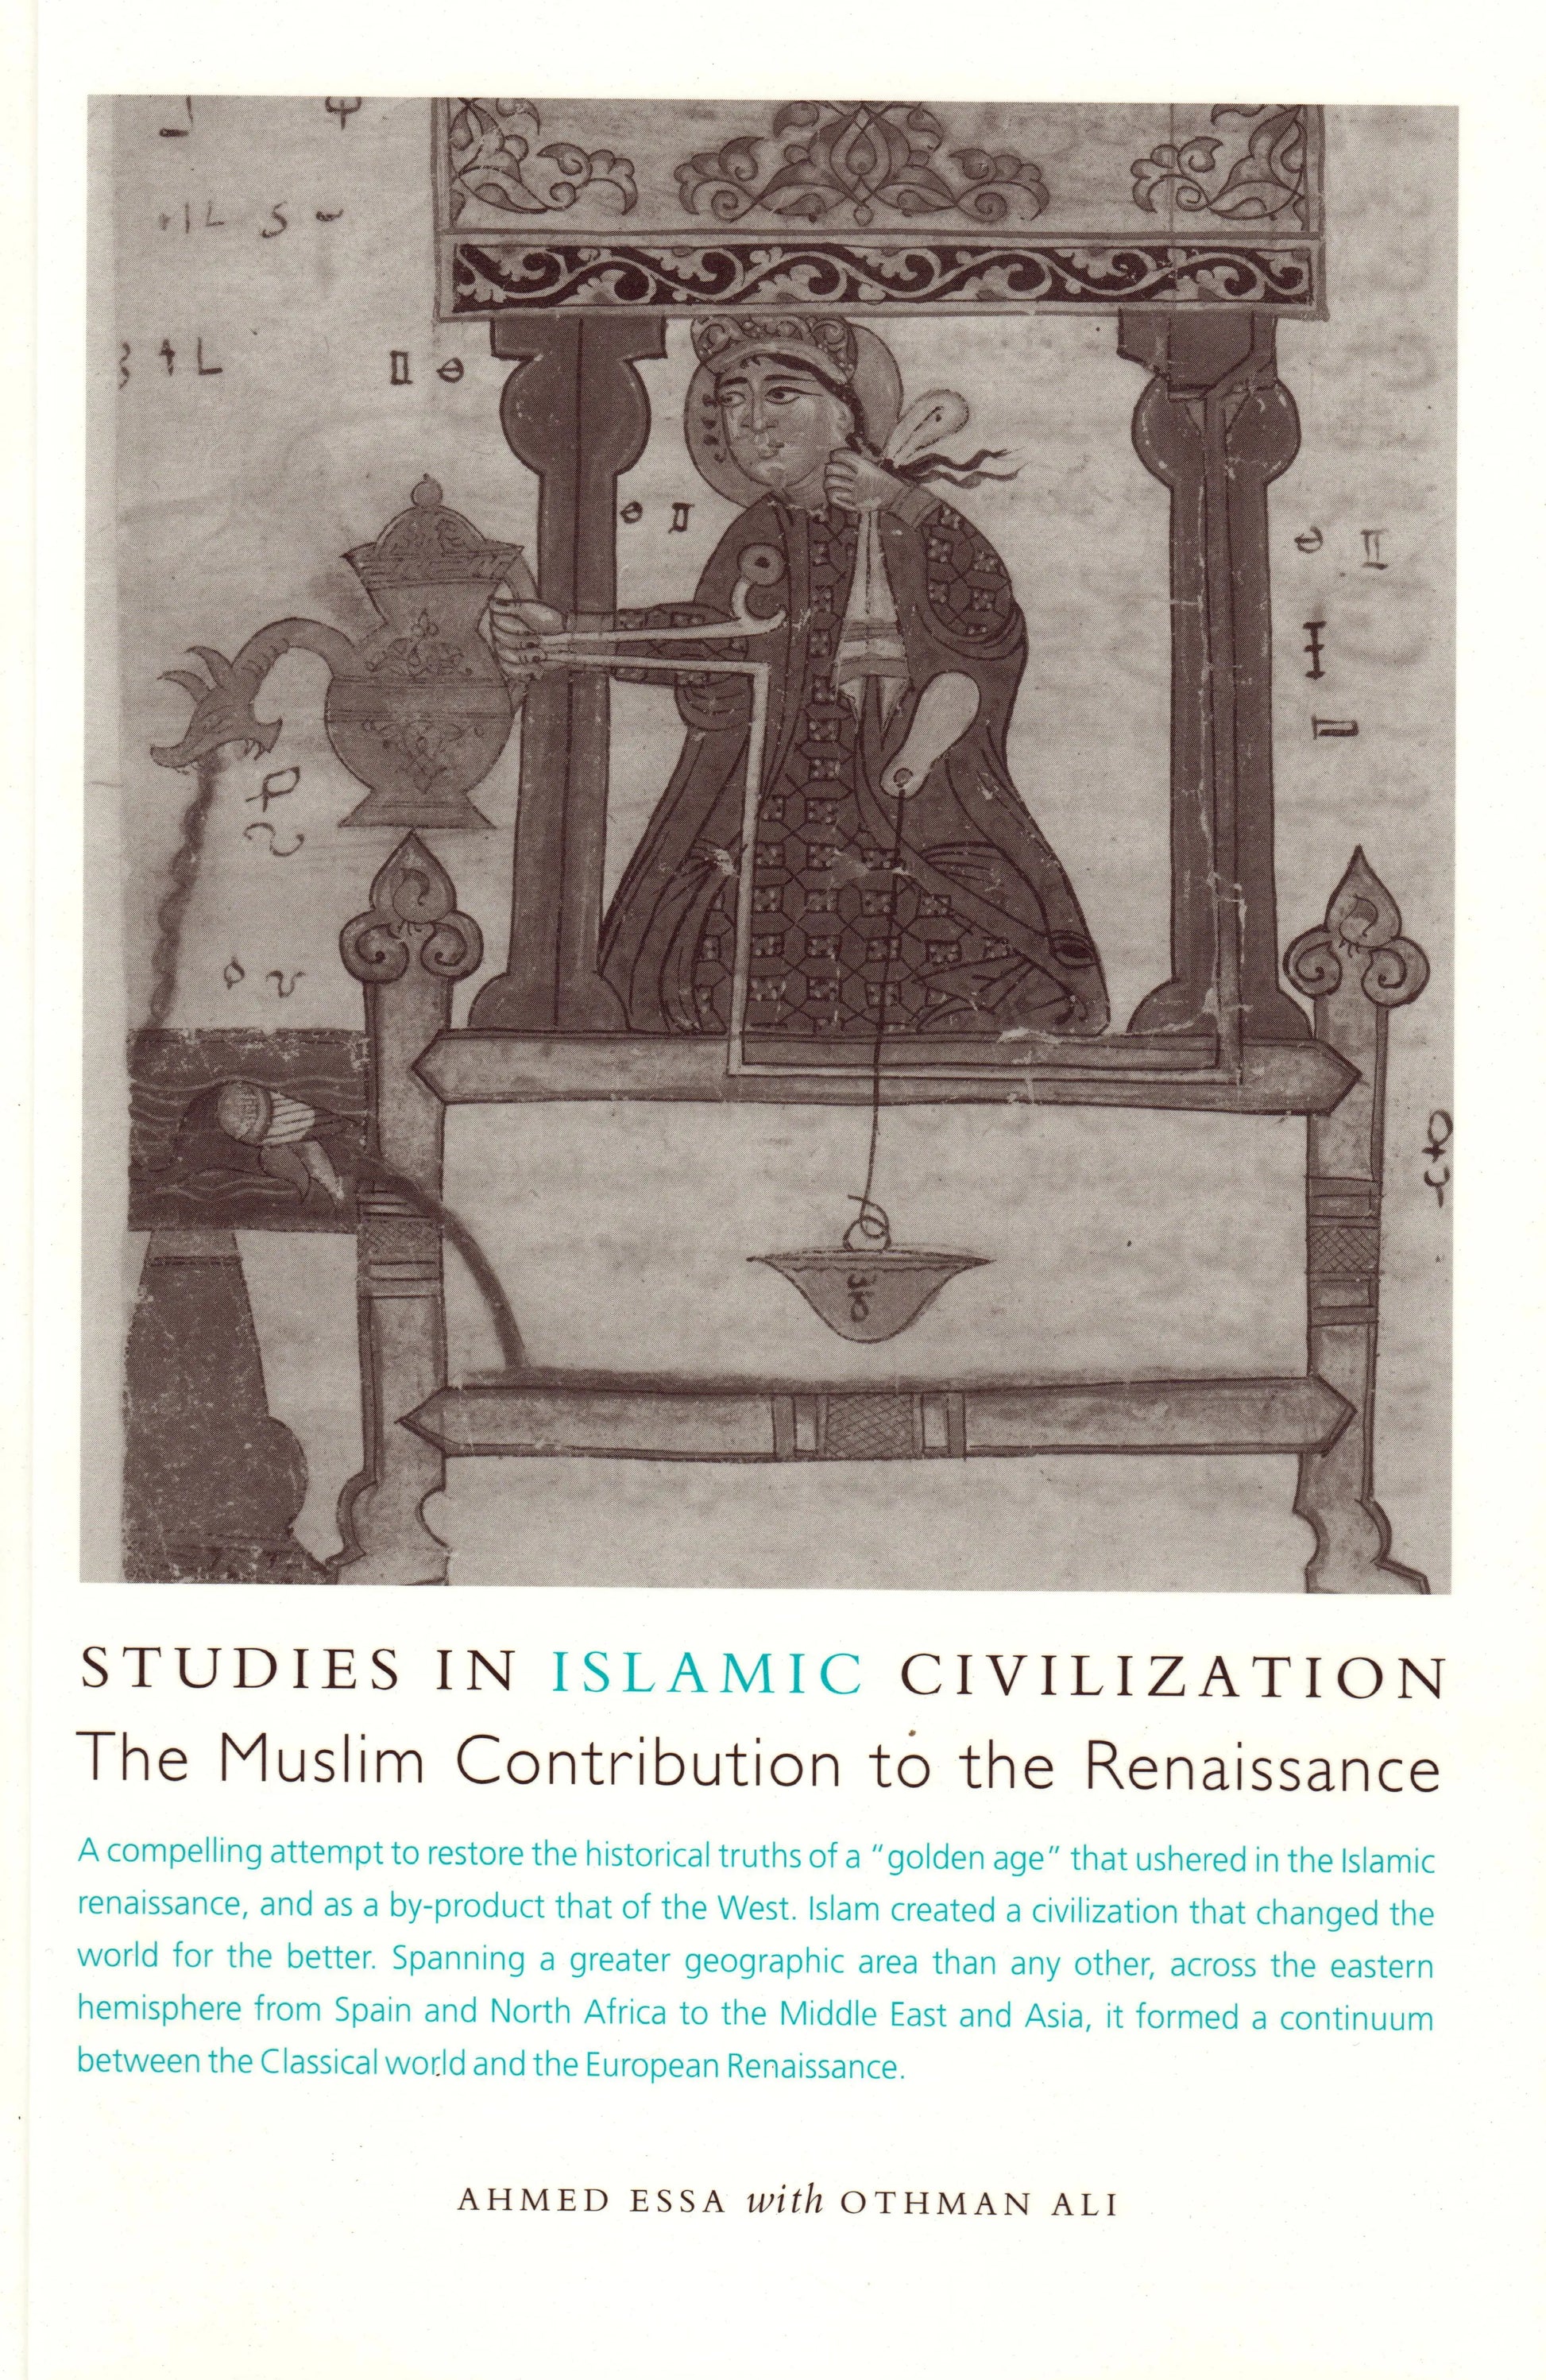 Studies in Islamic Civilization: The Muslim Contribution to the Renaissance International Institute of Islamic Thought